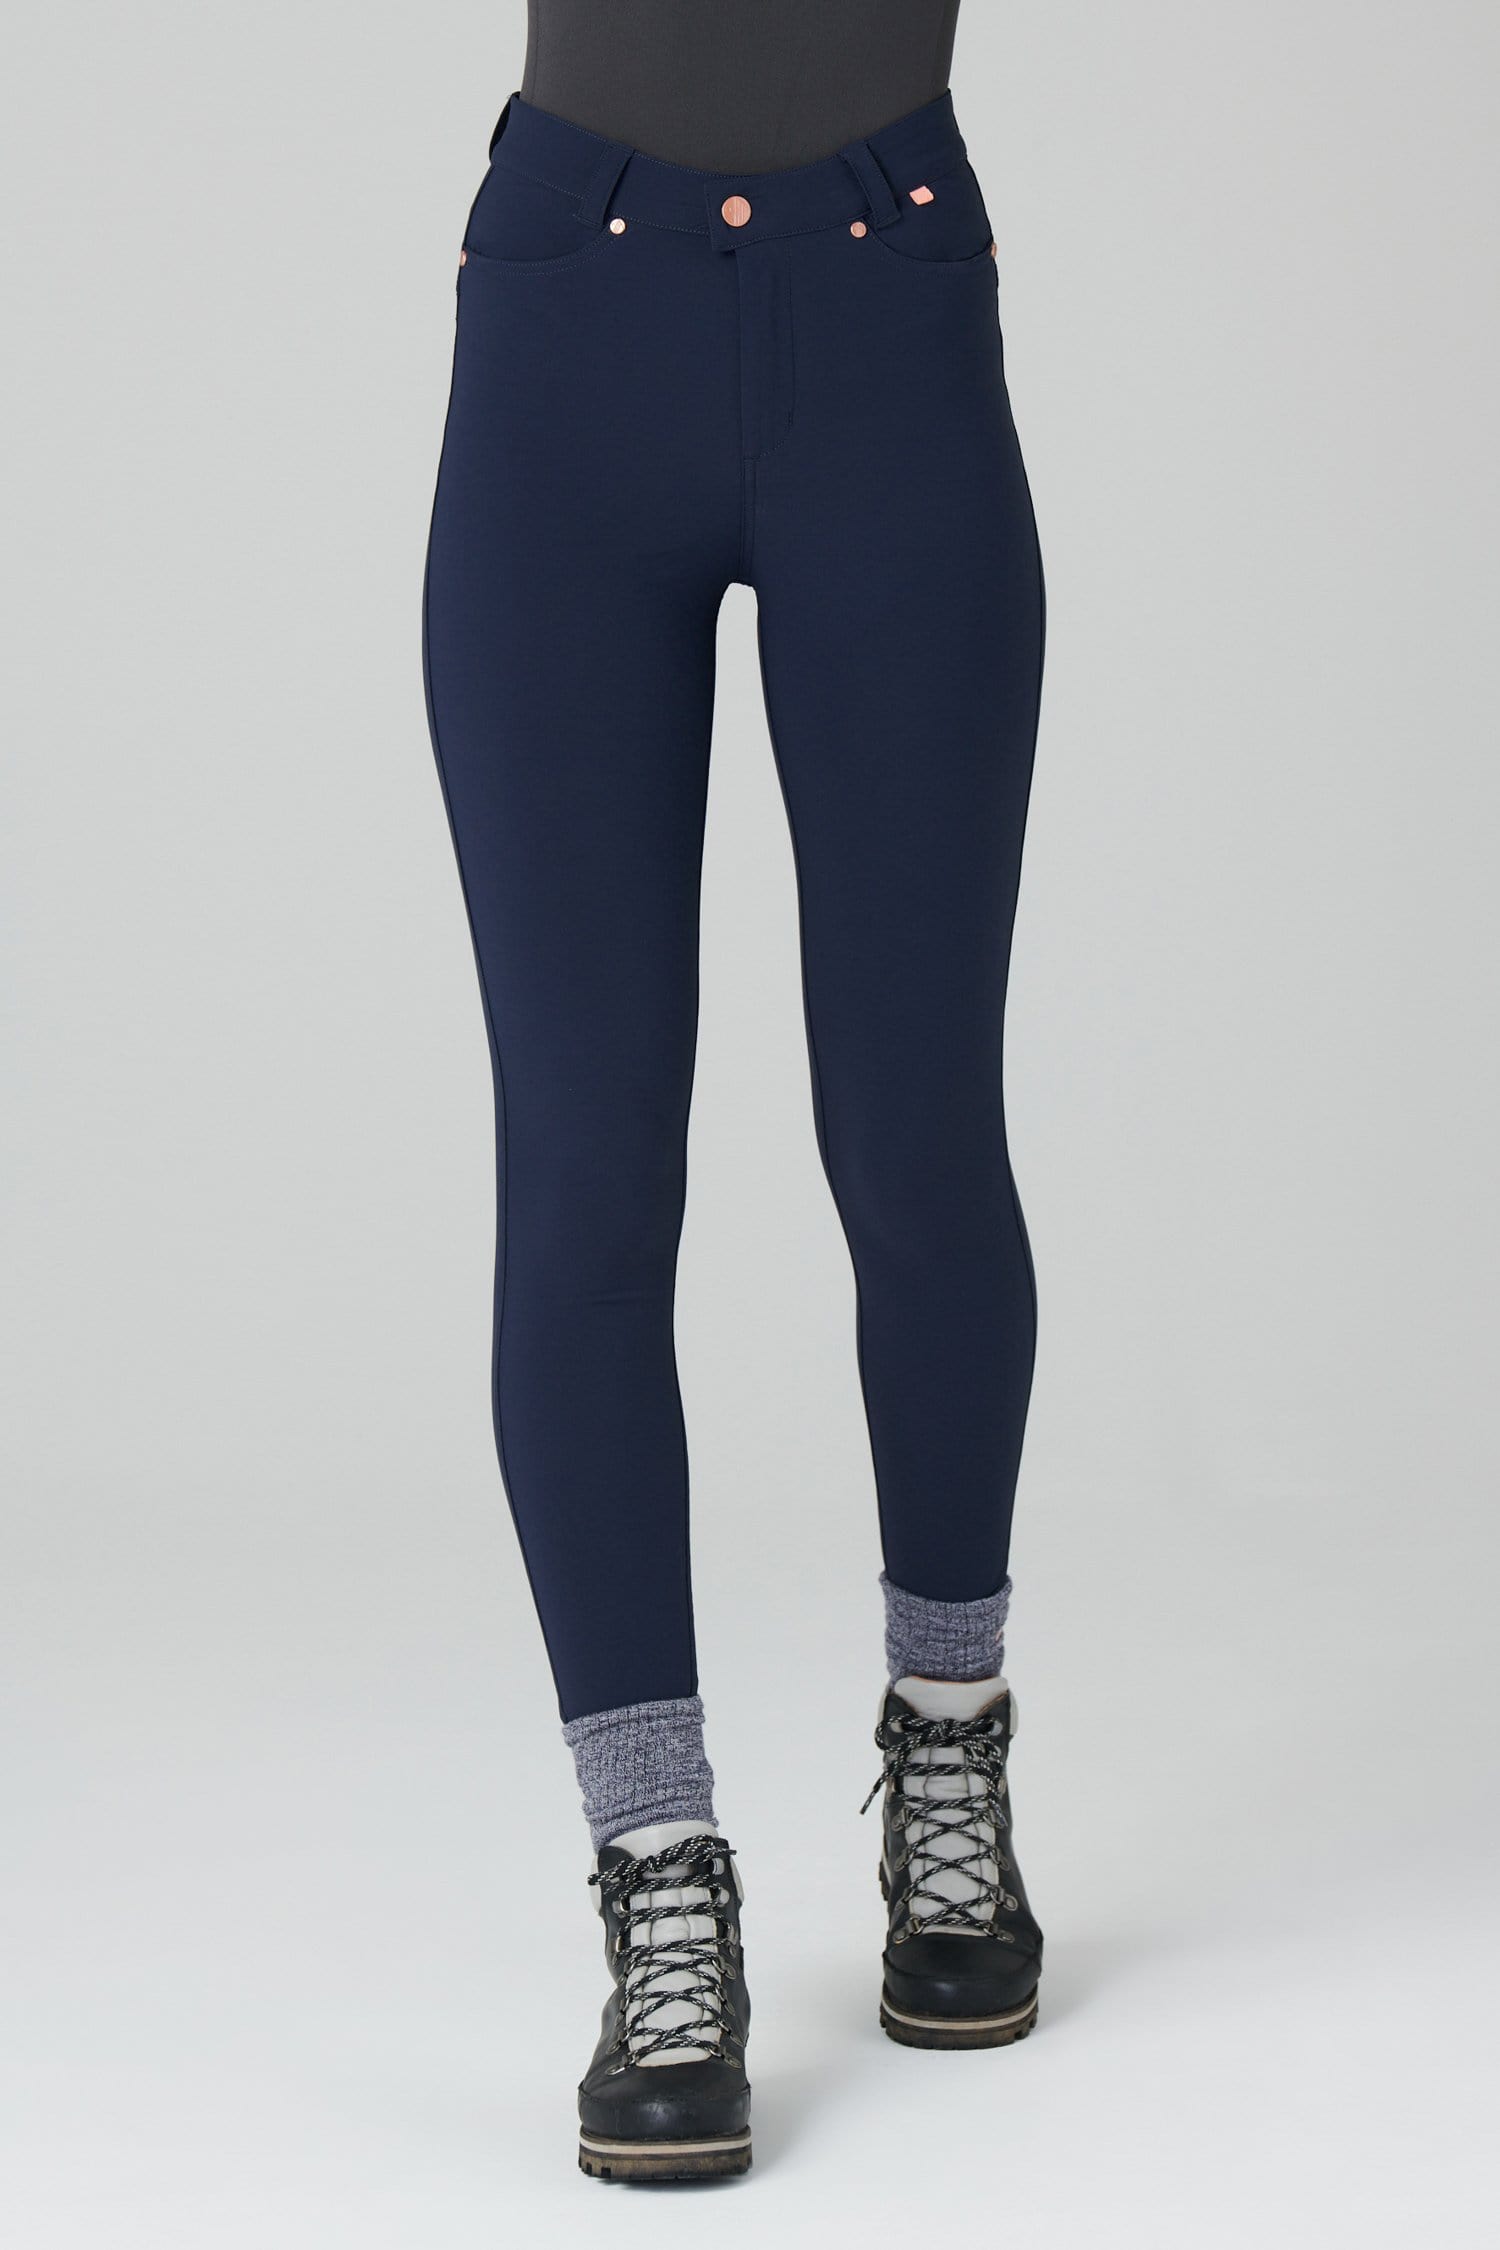 Max Stretch Skinny Outdoor Trousers - Deep Navy - 30r / Uk12 - Womens - Acai Outdoorwear